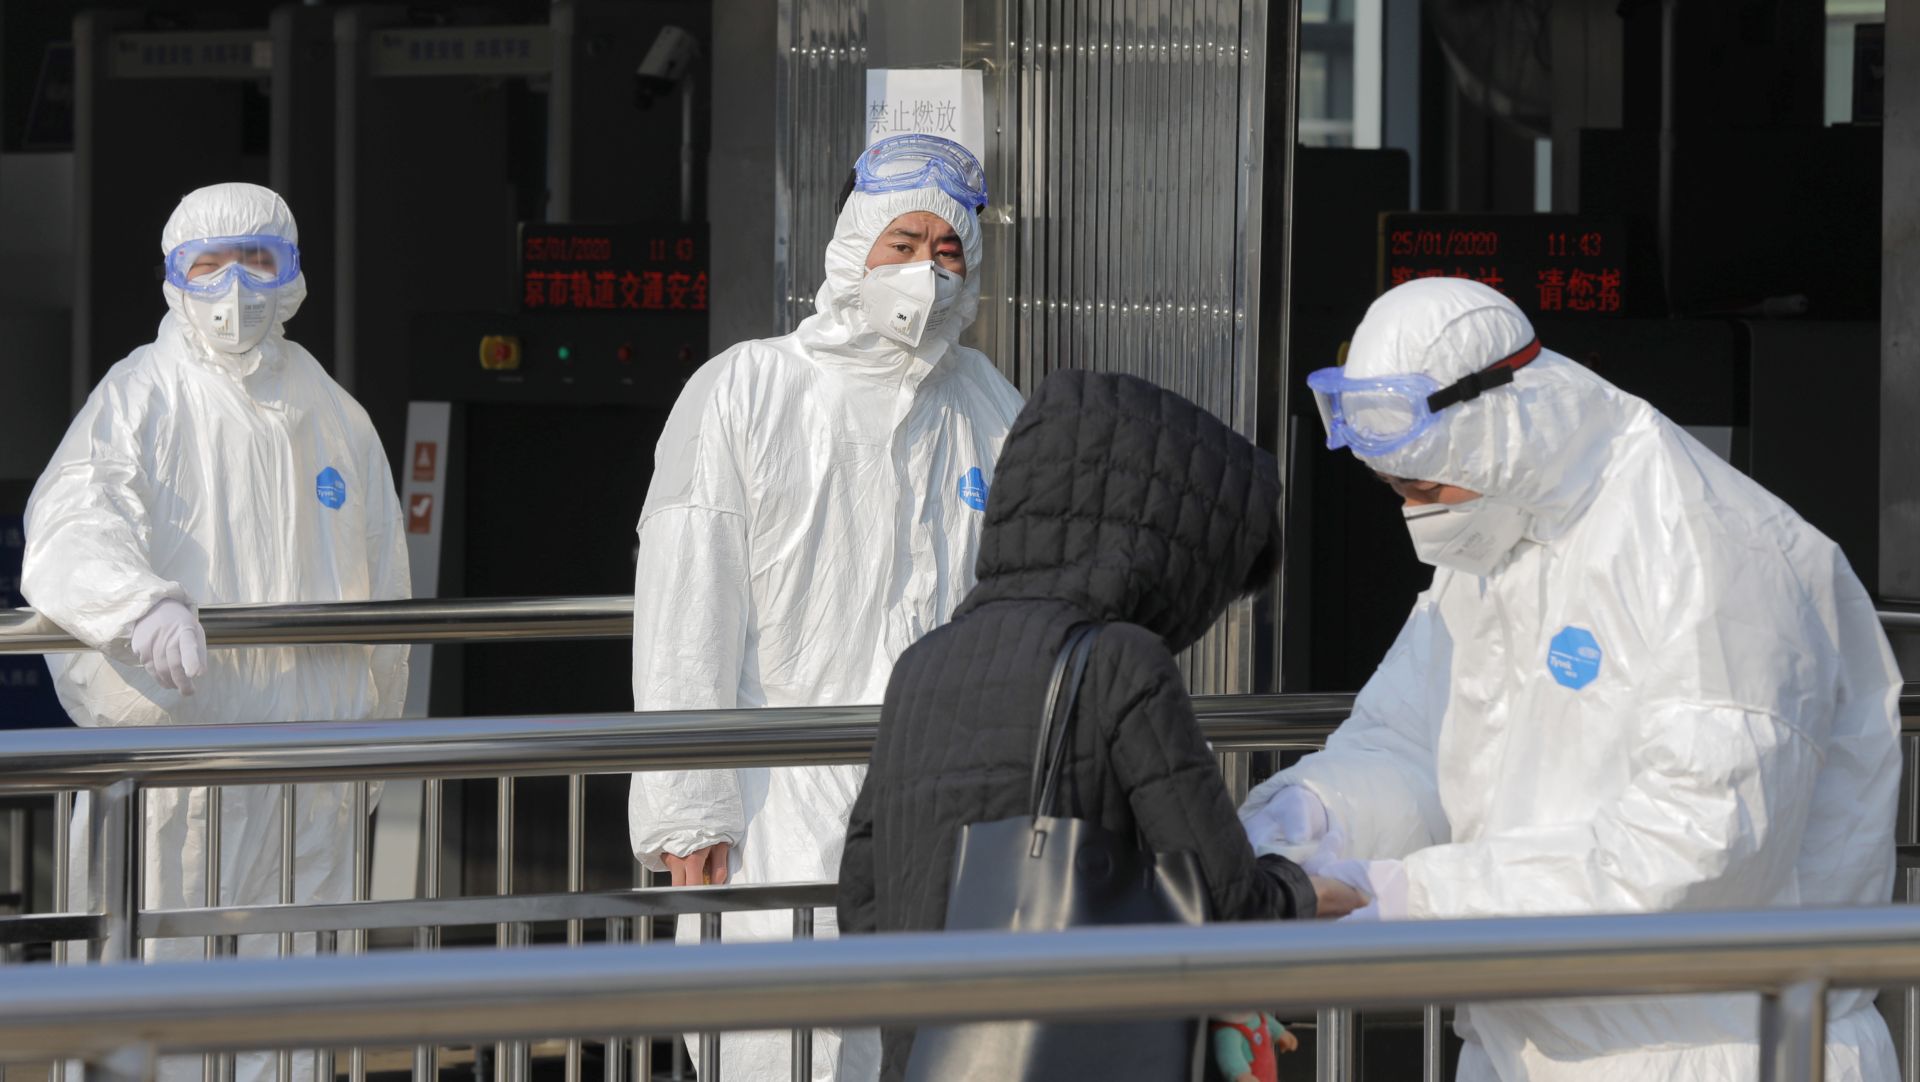 epa08161528 Security personnel wearing hazardous material suits measure body temperatures of passenger at the entrance of a subway station in Beijing, China, 25 January 2020. Two airports in Beijing will start to measure temperatures for arriving passengers from 25 January 2020 as the outbreak of coronavirus has so far claimed 41 lives and infected about 1300 others, according to media reports.  EPA/WU HONG